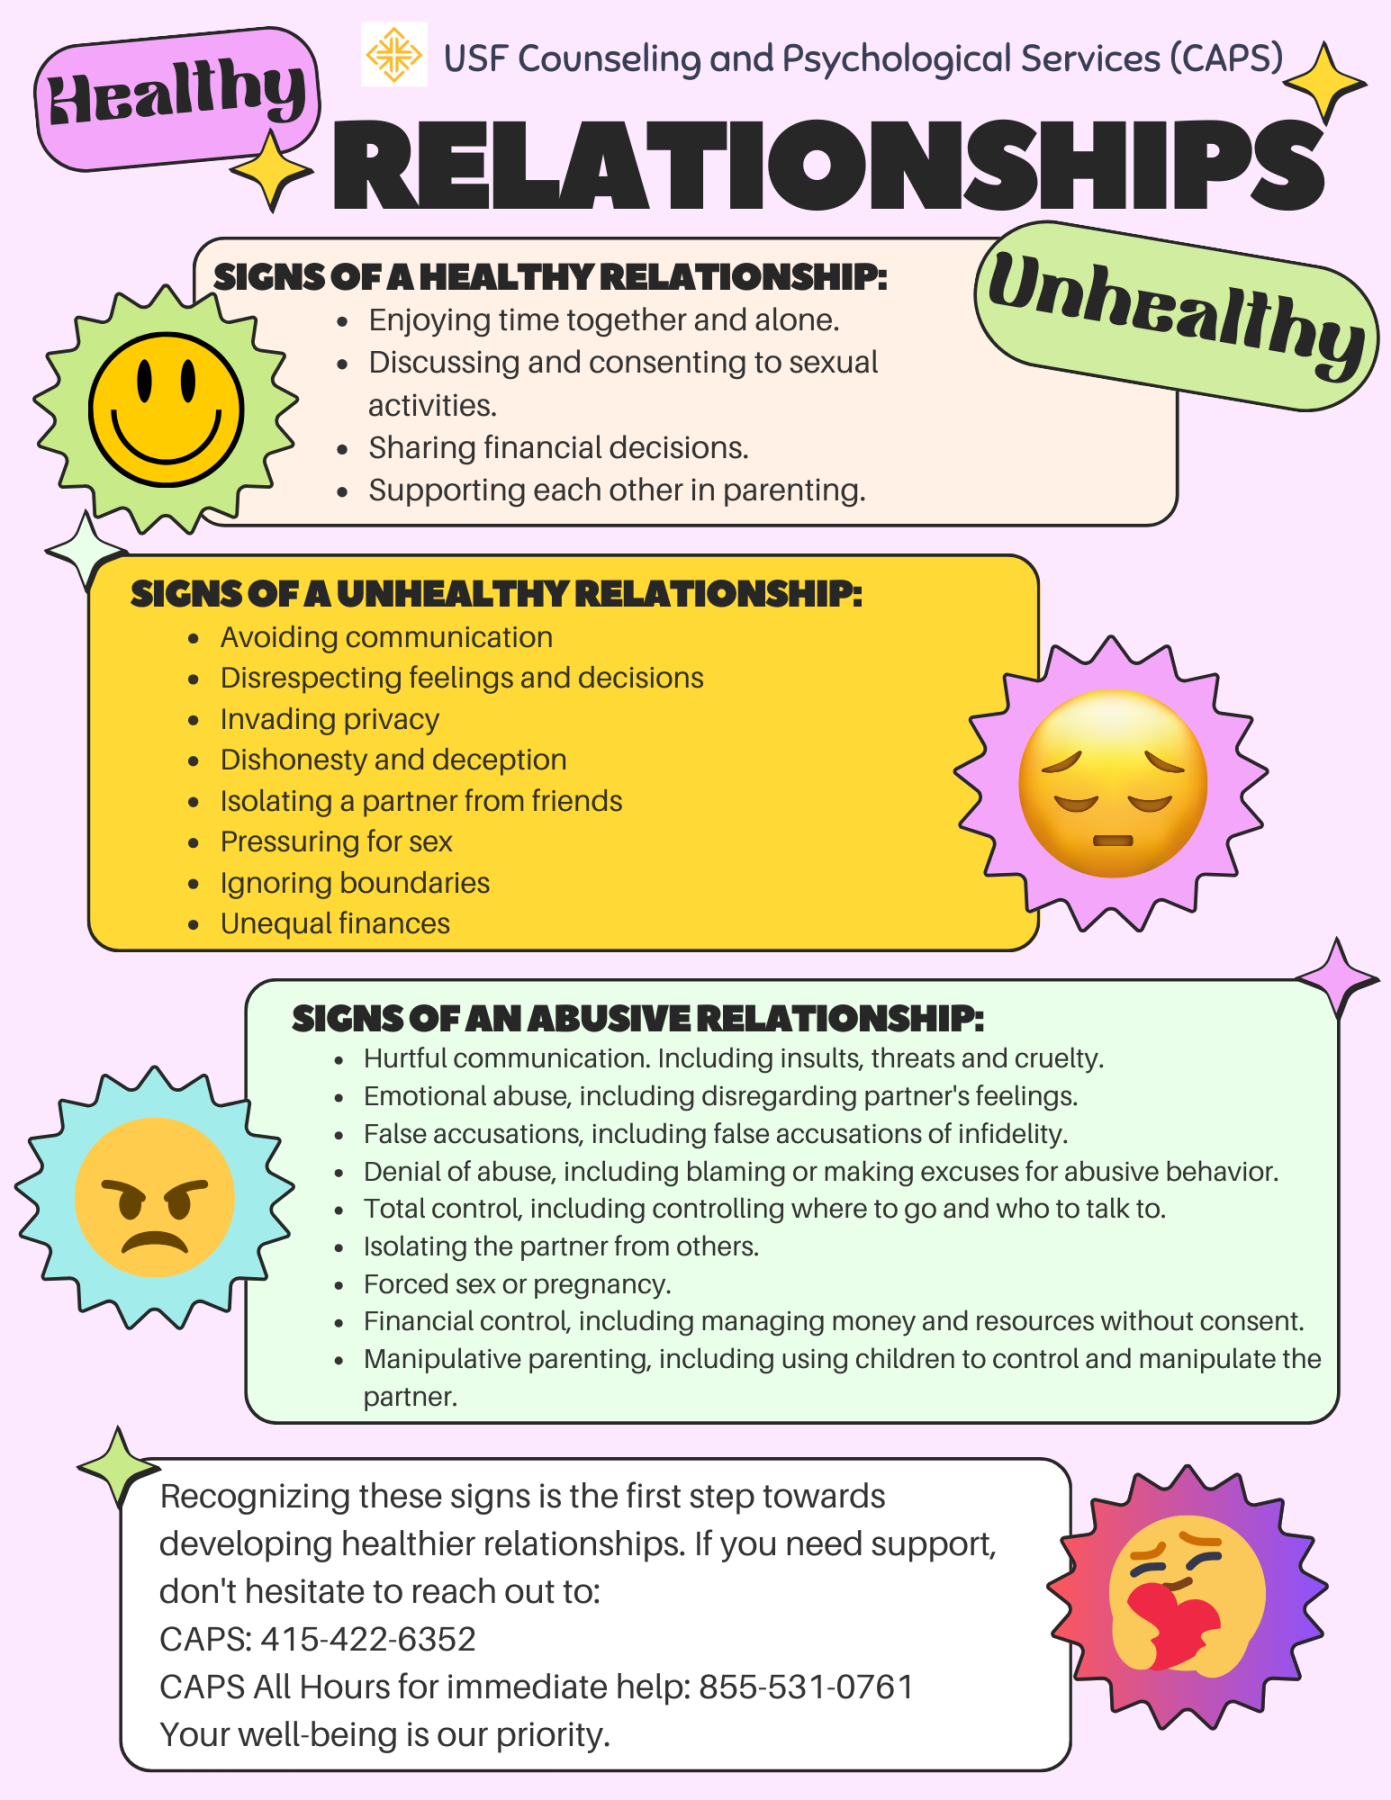 Healthy vs Unhealthy Relationships Infographic